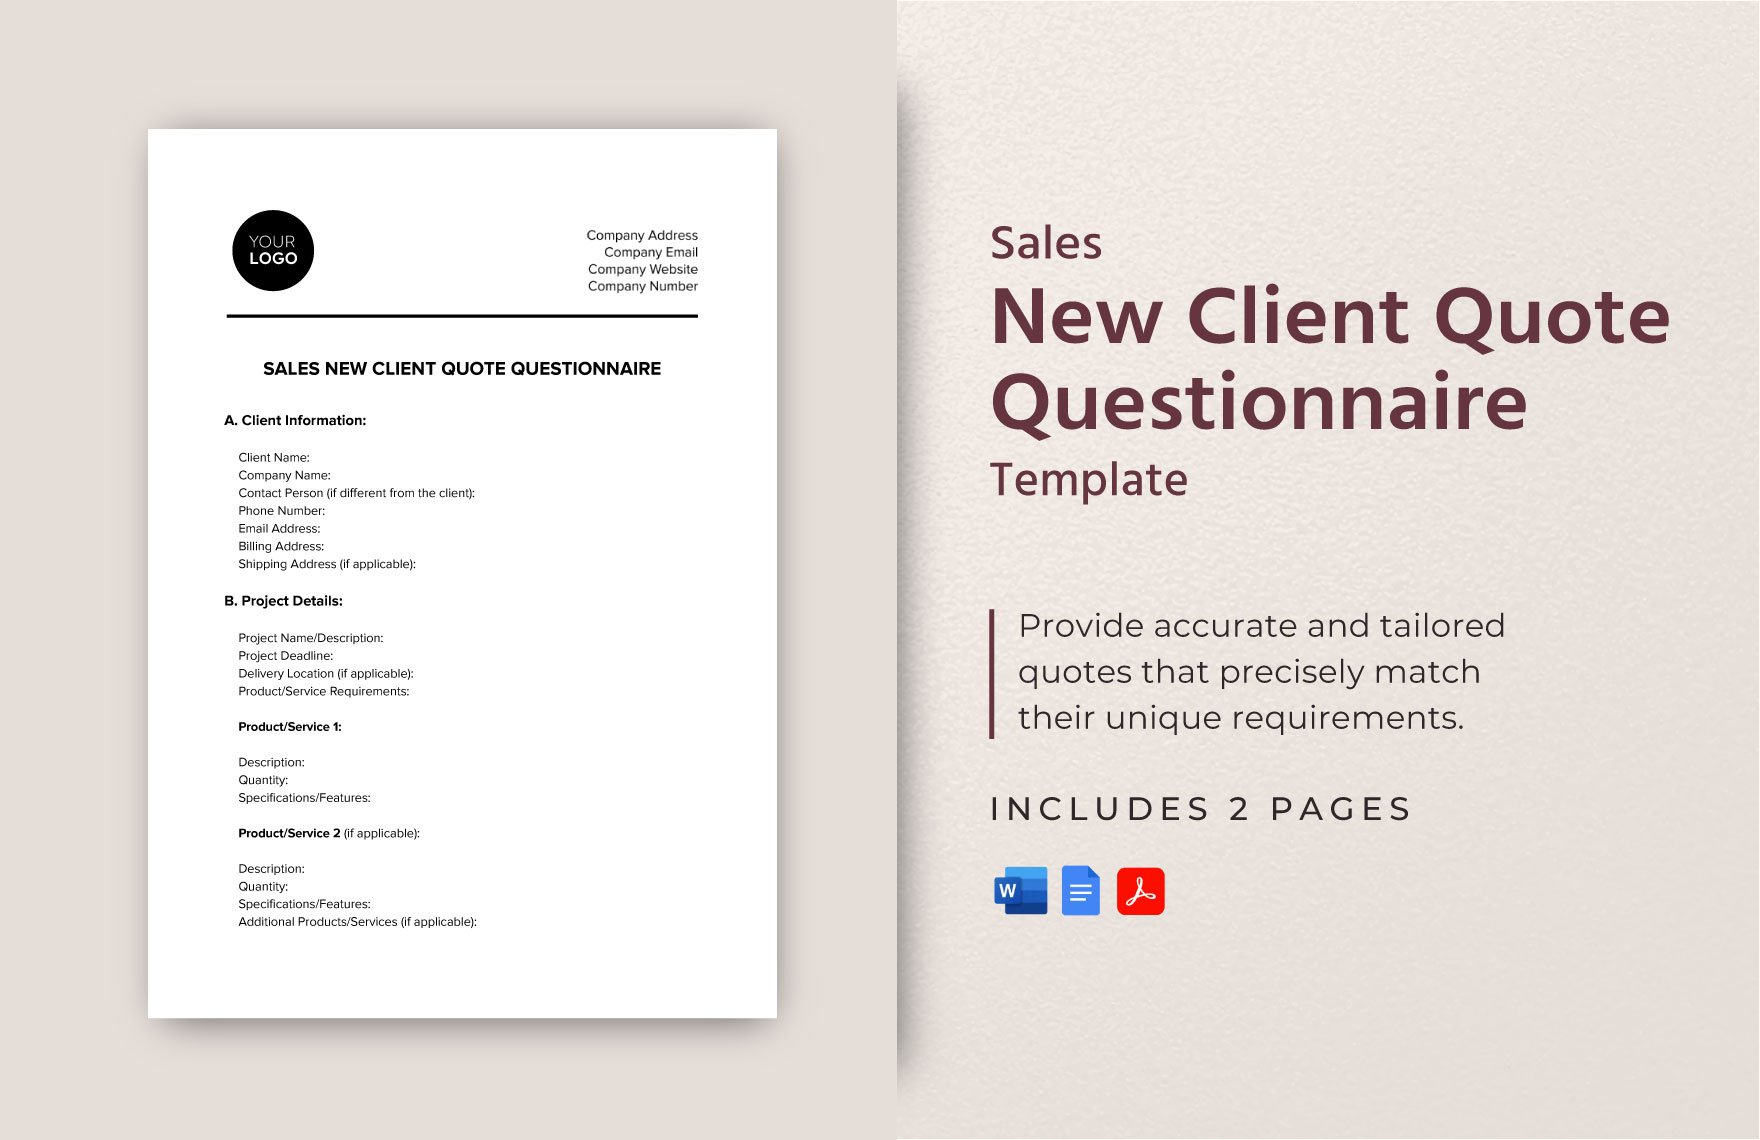 Sales New Client Quote Questionnaire Template in Word, Google Docs, PDF